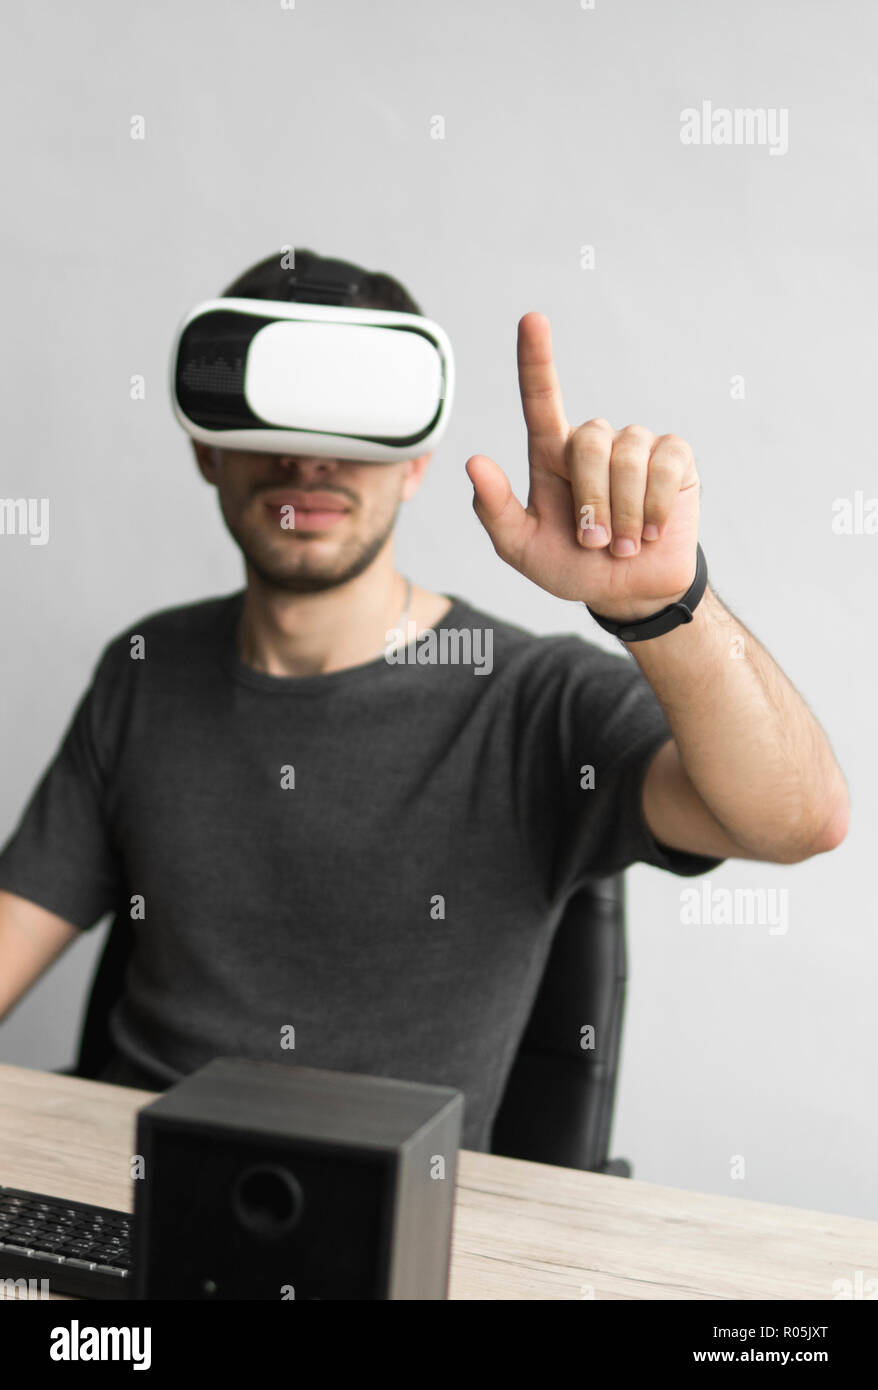 Young man wearing virtual reality goggles headset and sitting in the office against computer. Connection, technology, new generation. Man trying to touch objects or control VR with a hand. Stock Photo